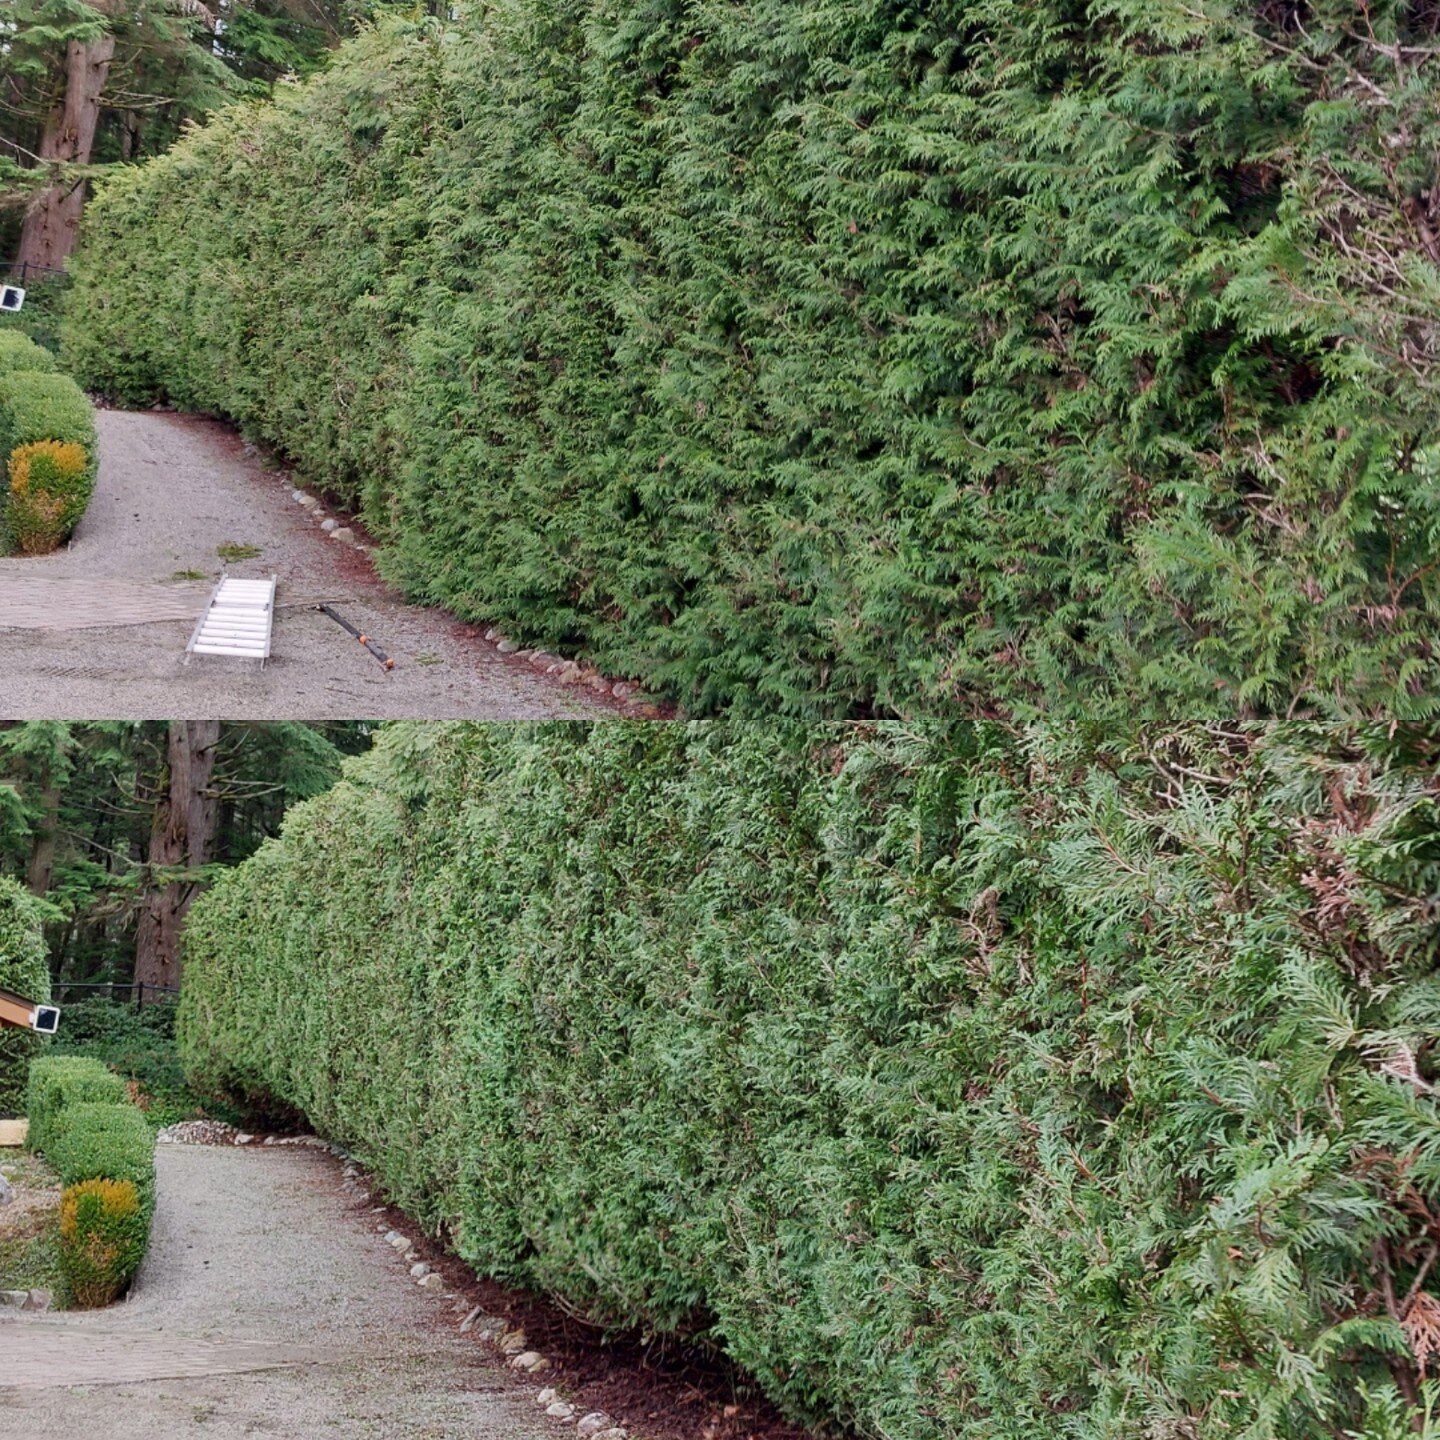 Hedge Trimming service recently completed